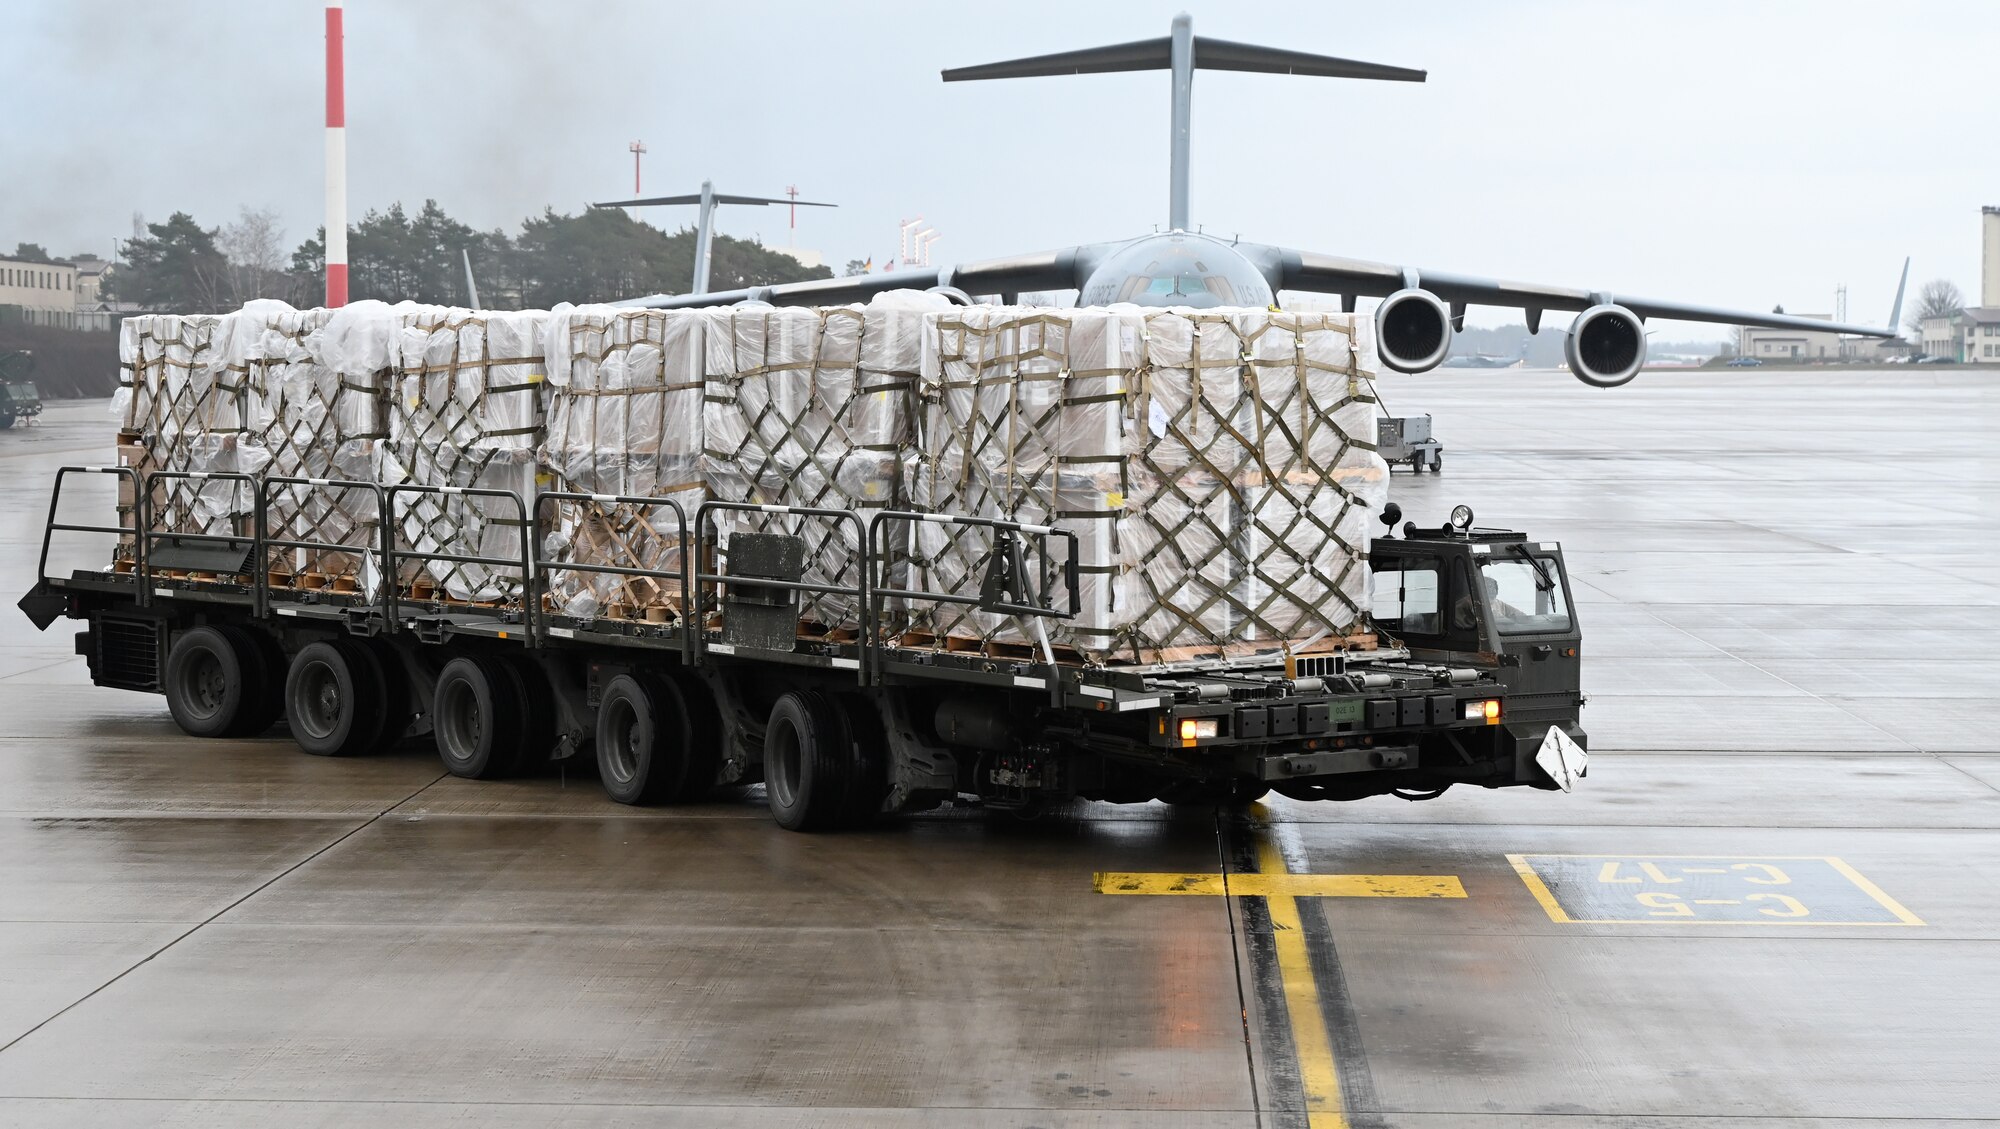 A vehicle with a long bed is carrying a few pallets on a wet flight line.